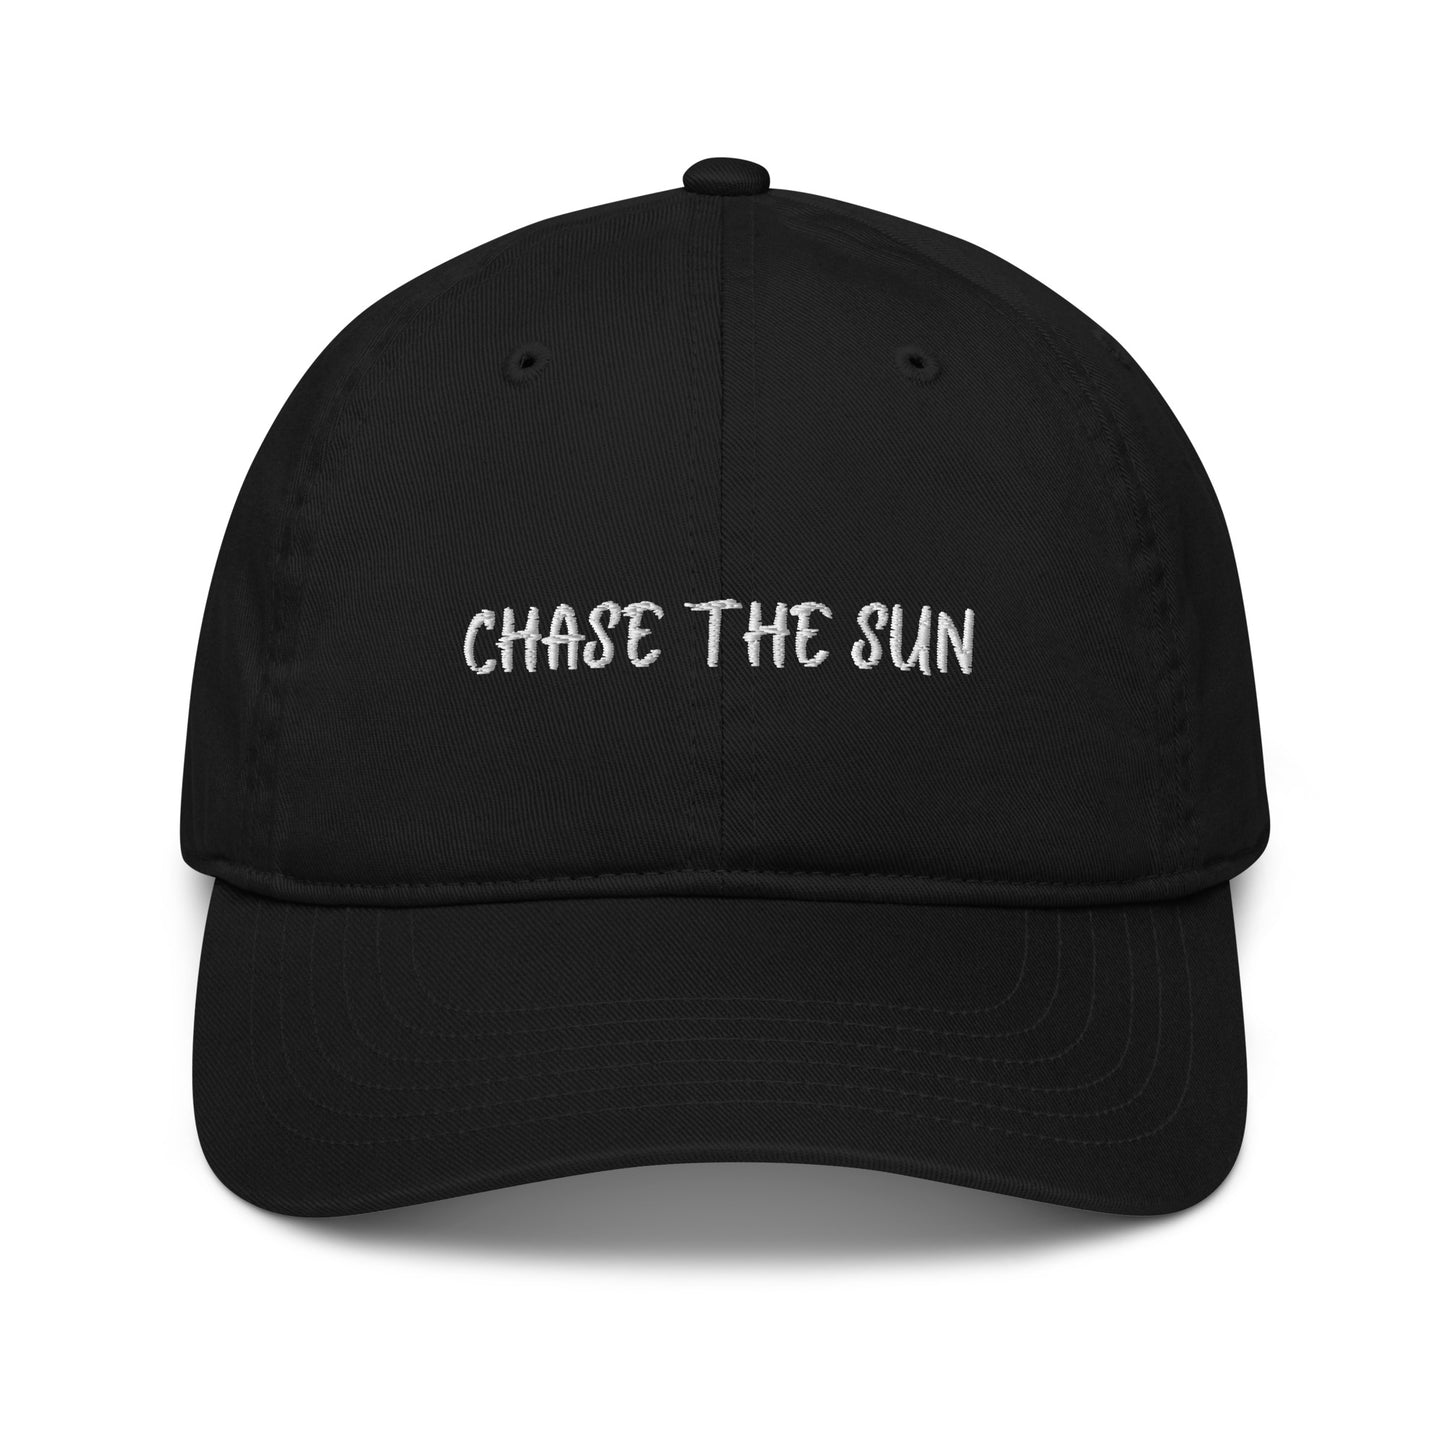 Chase The Sun Organic Hat - Black Front